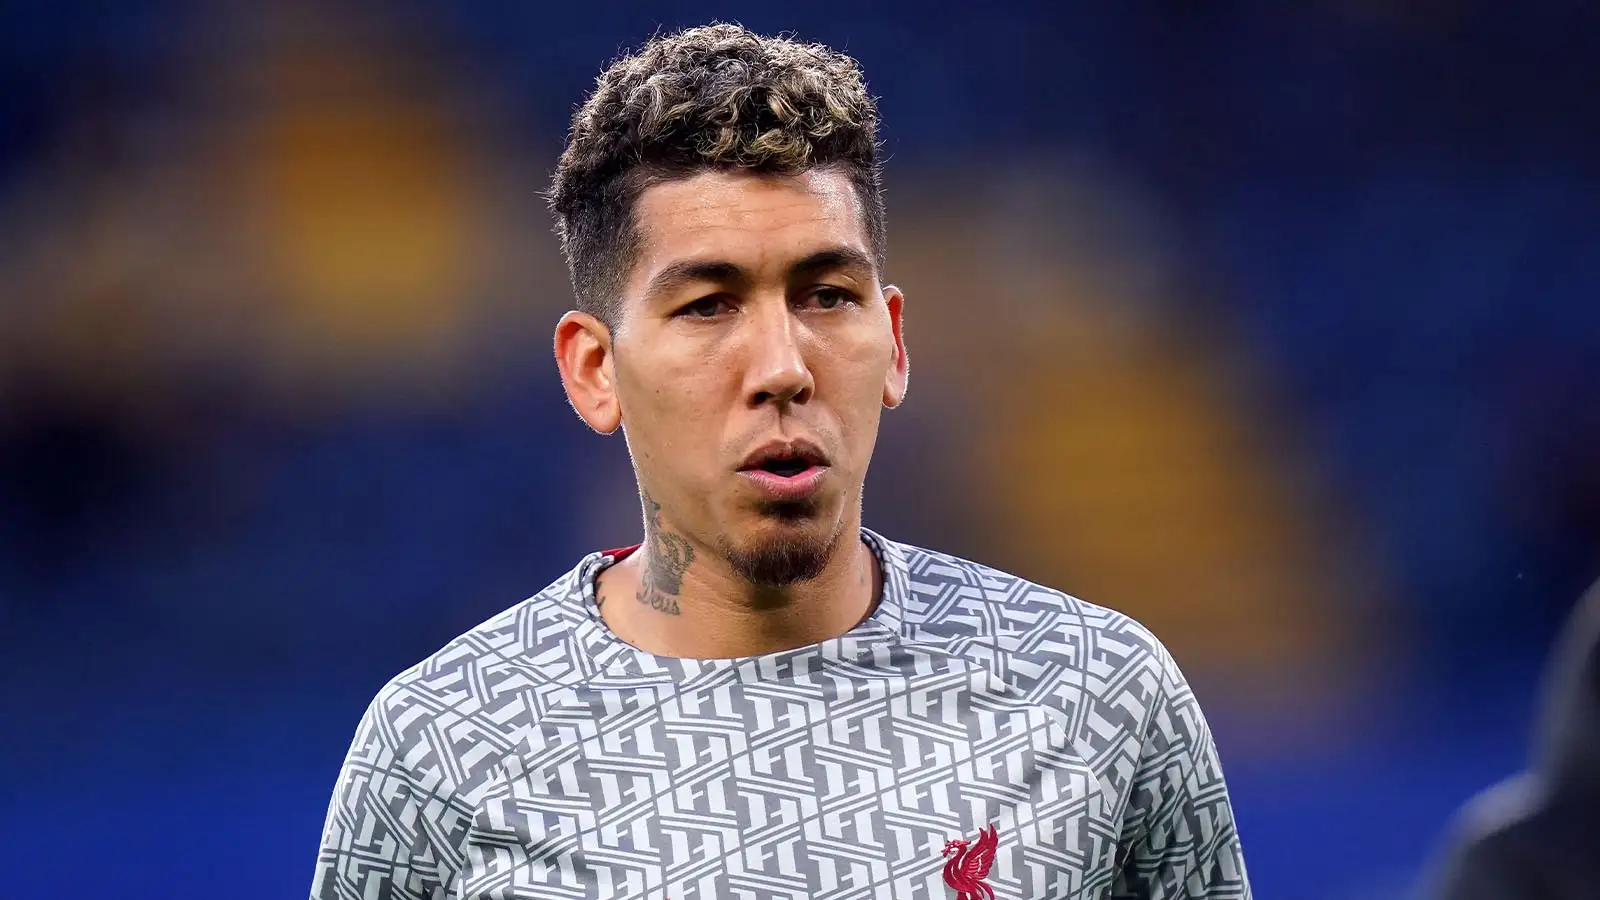 Liverpool's Roberto Firmino warms up before the Premier League match at Stamford Bridge, London.